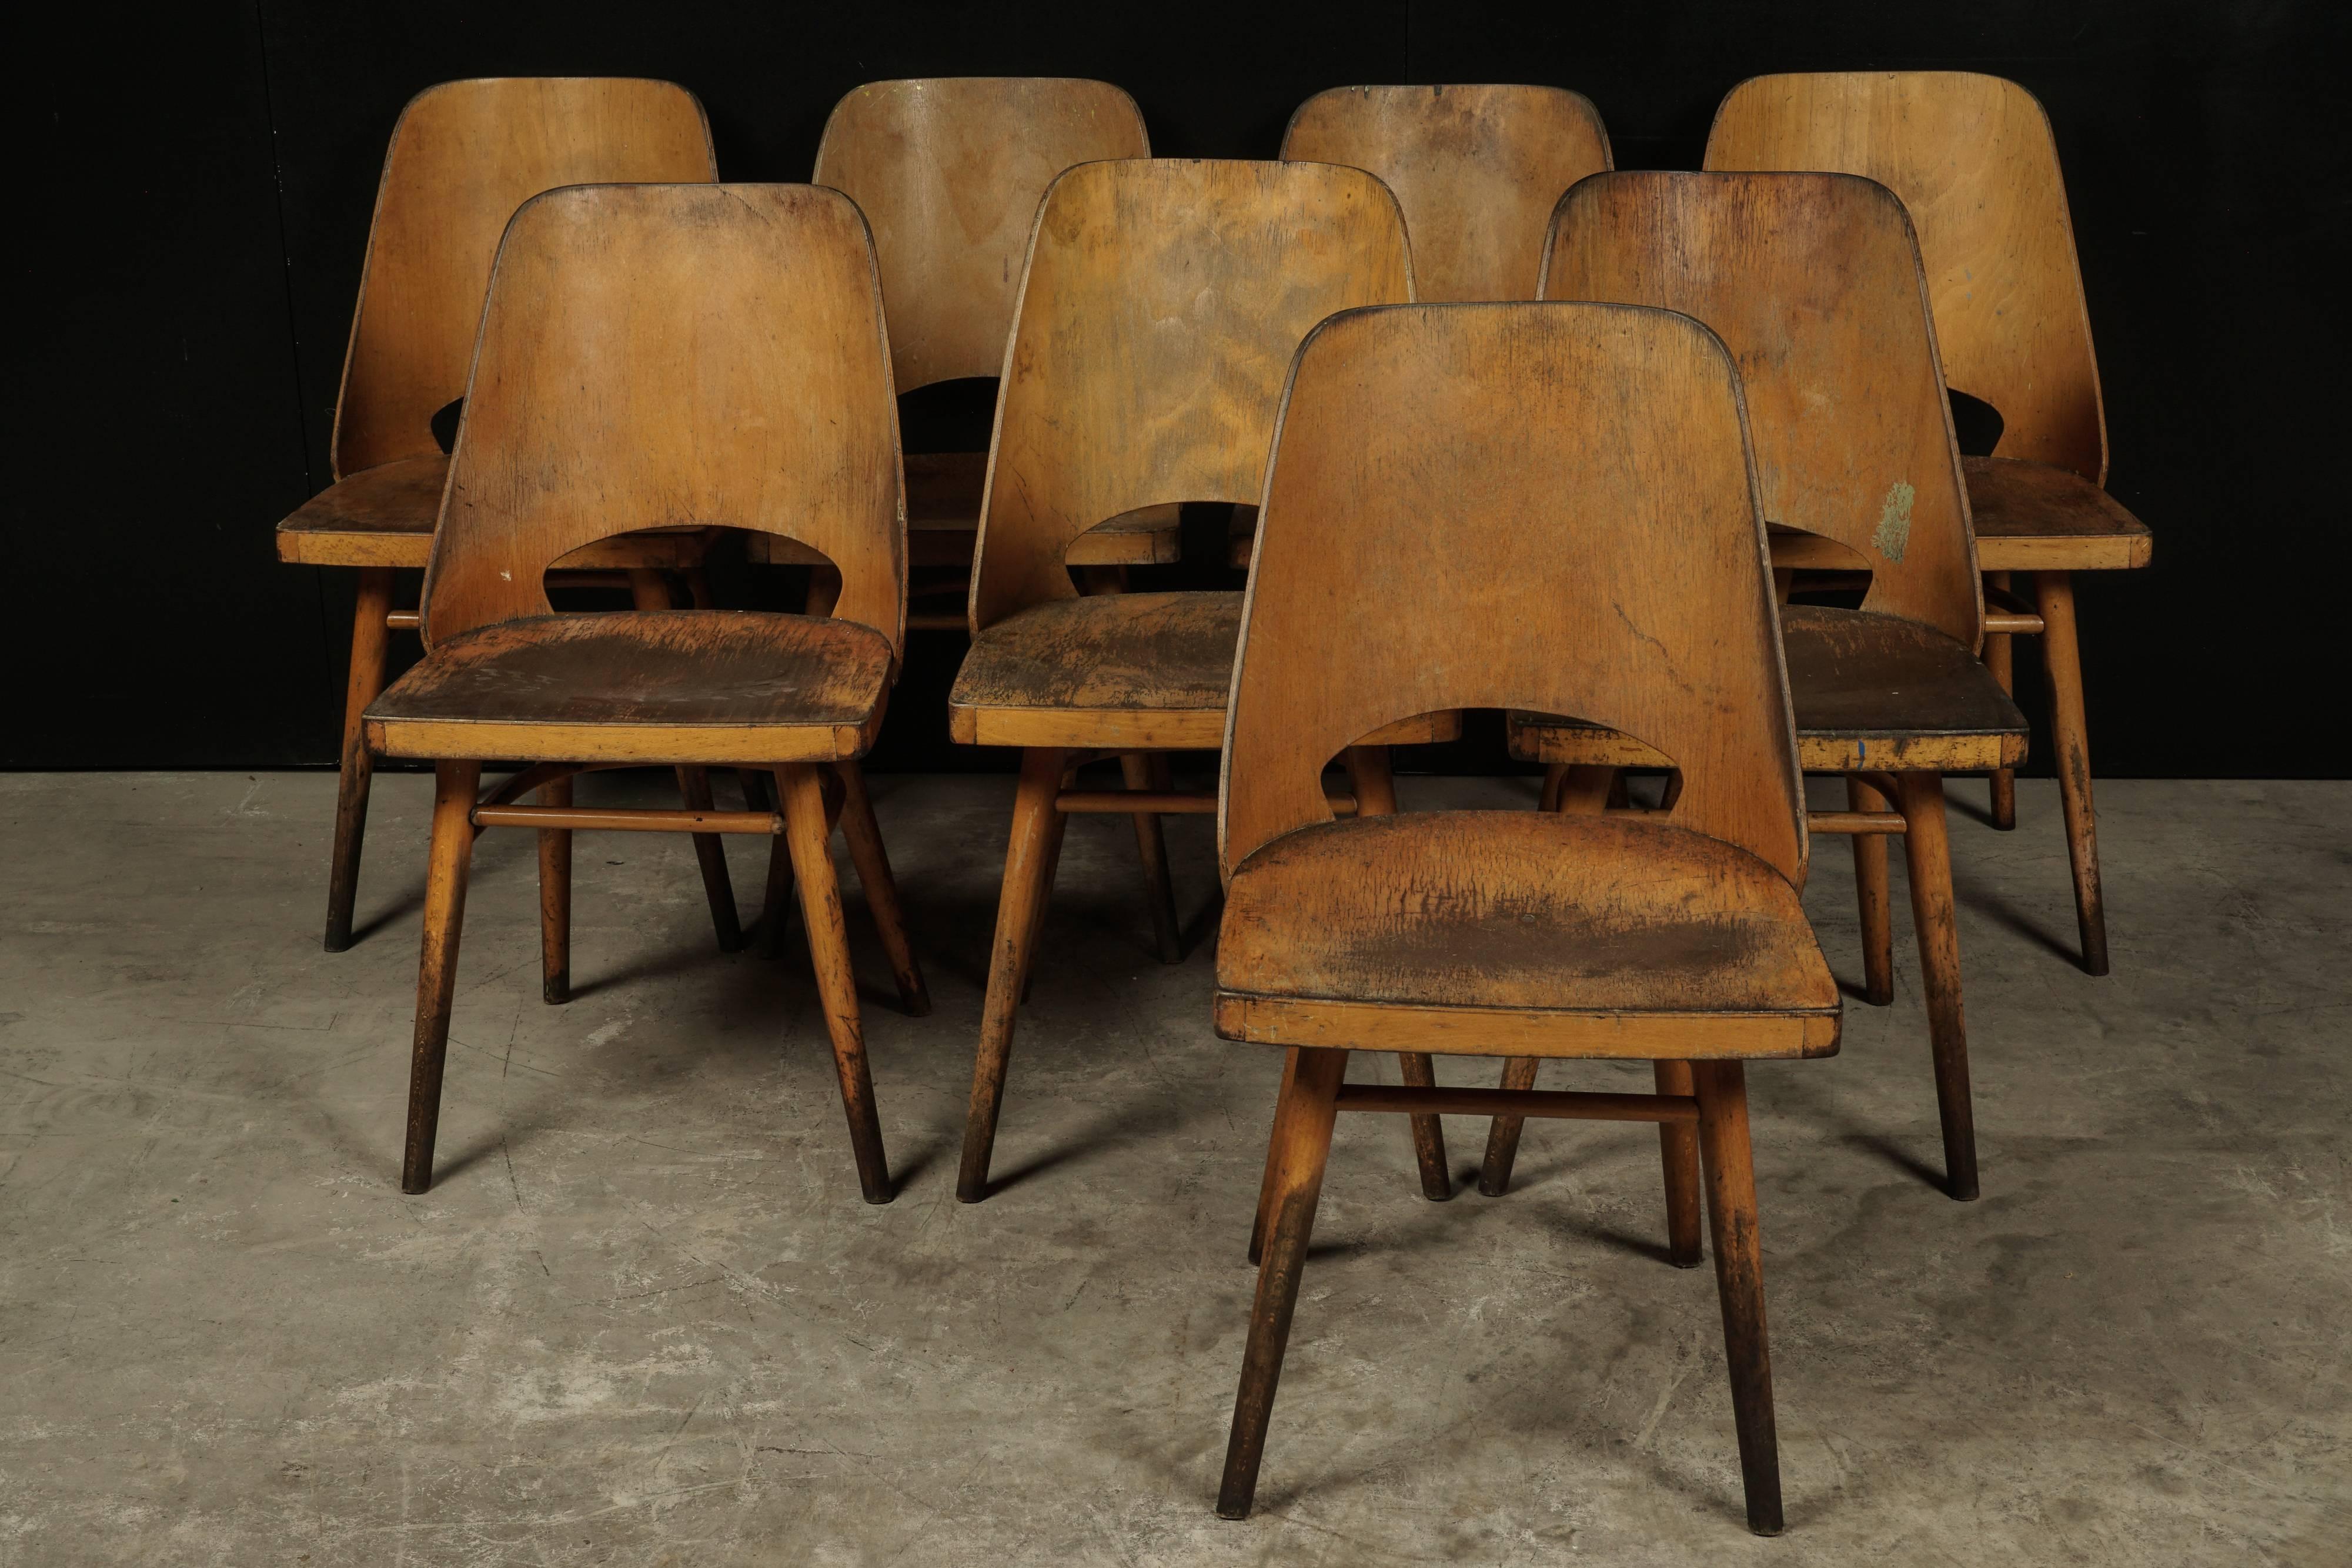 Set of eight Shell chairs from Czech Republic, circa 1960. Molded seats and frame of beech. Original patina and wear.